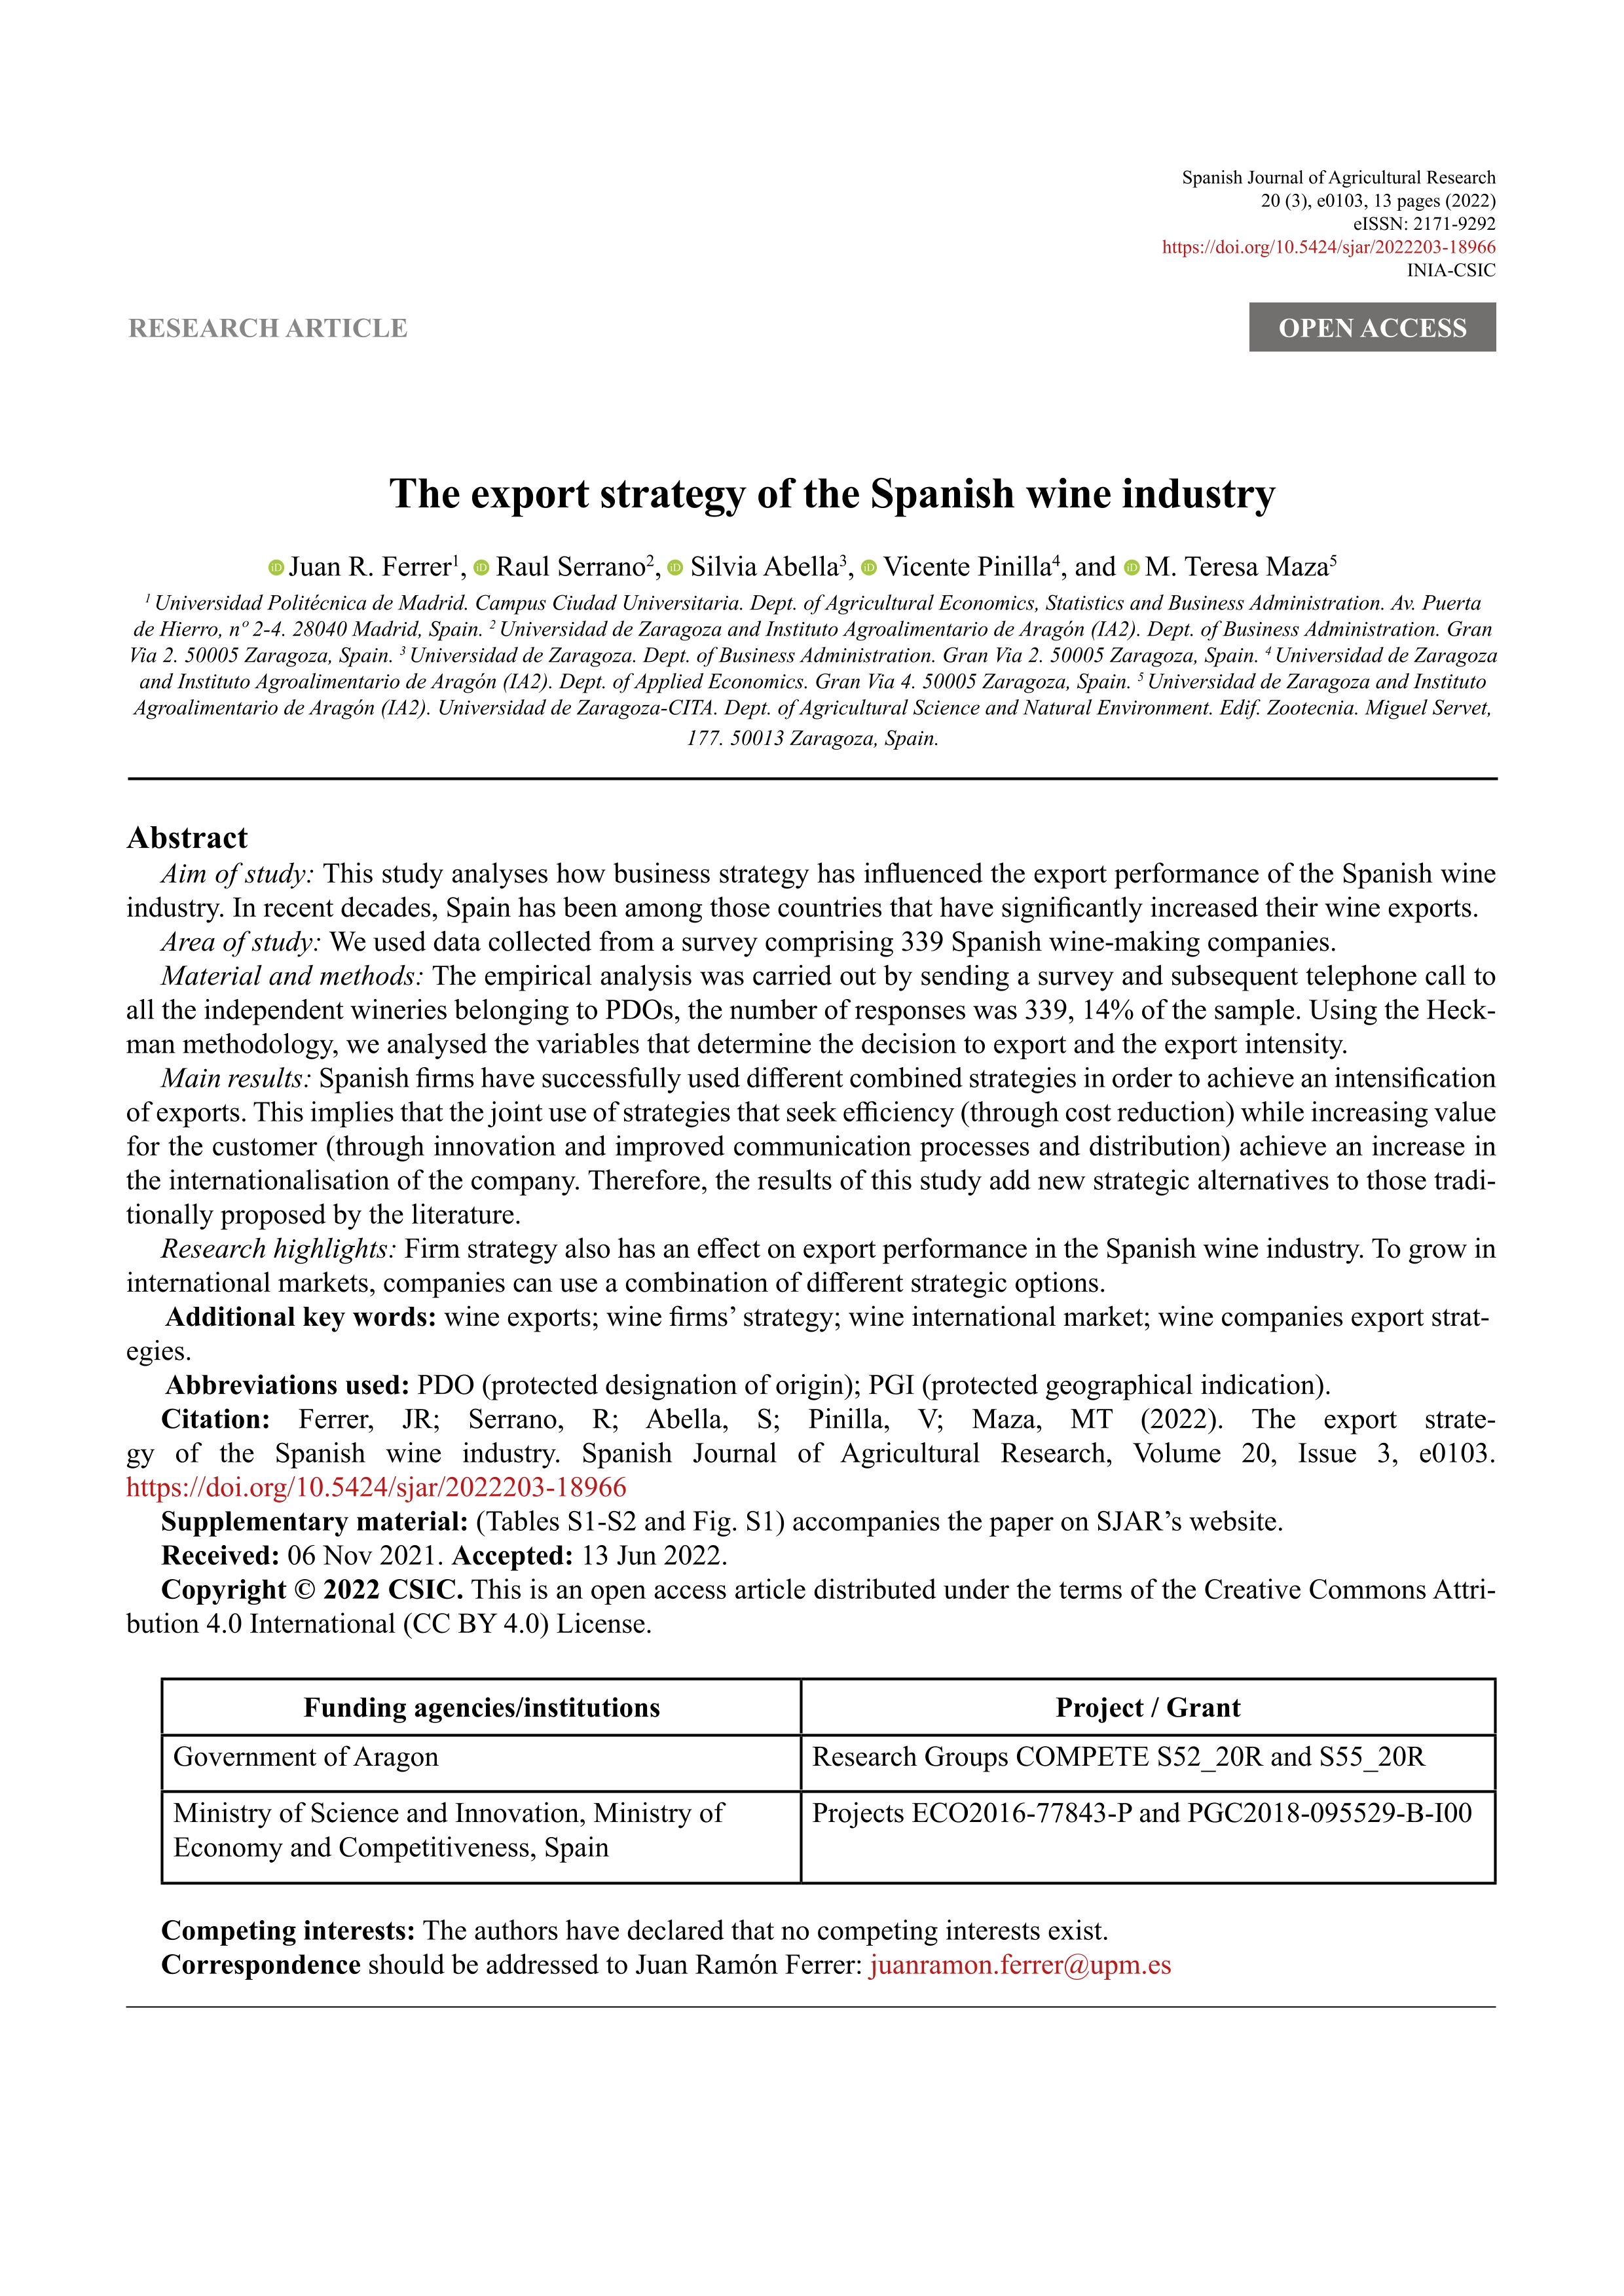 The export strategy of the Spanish wine industry